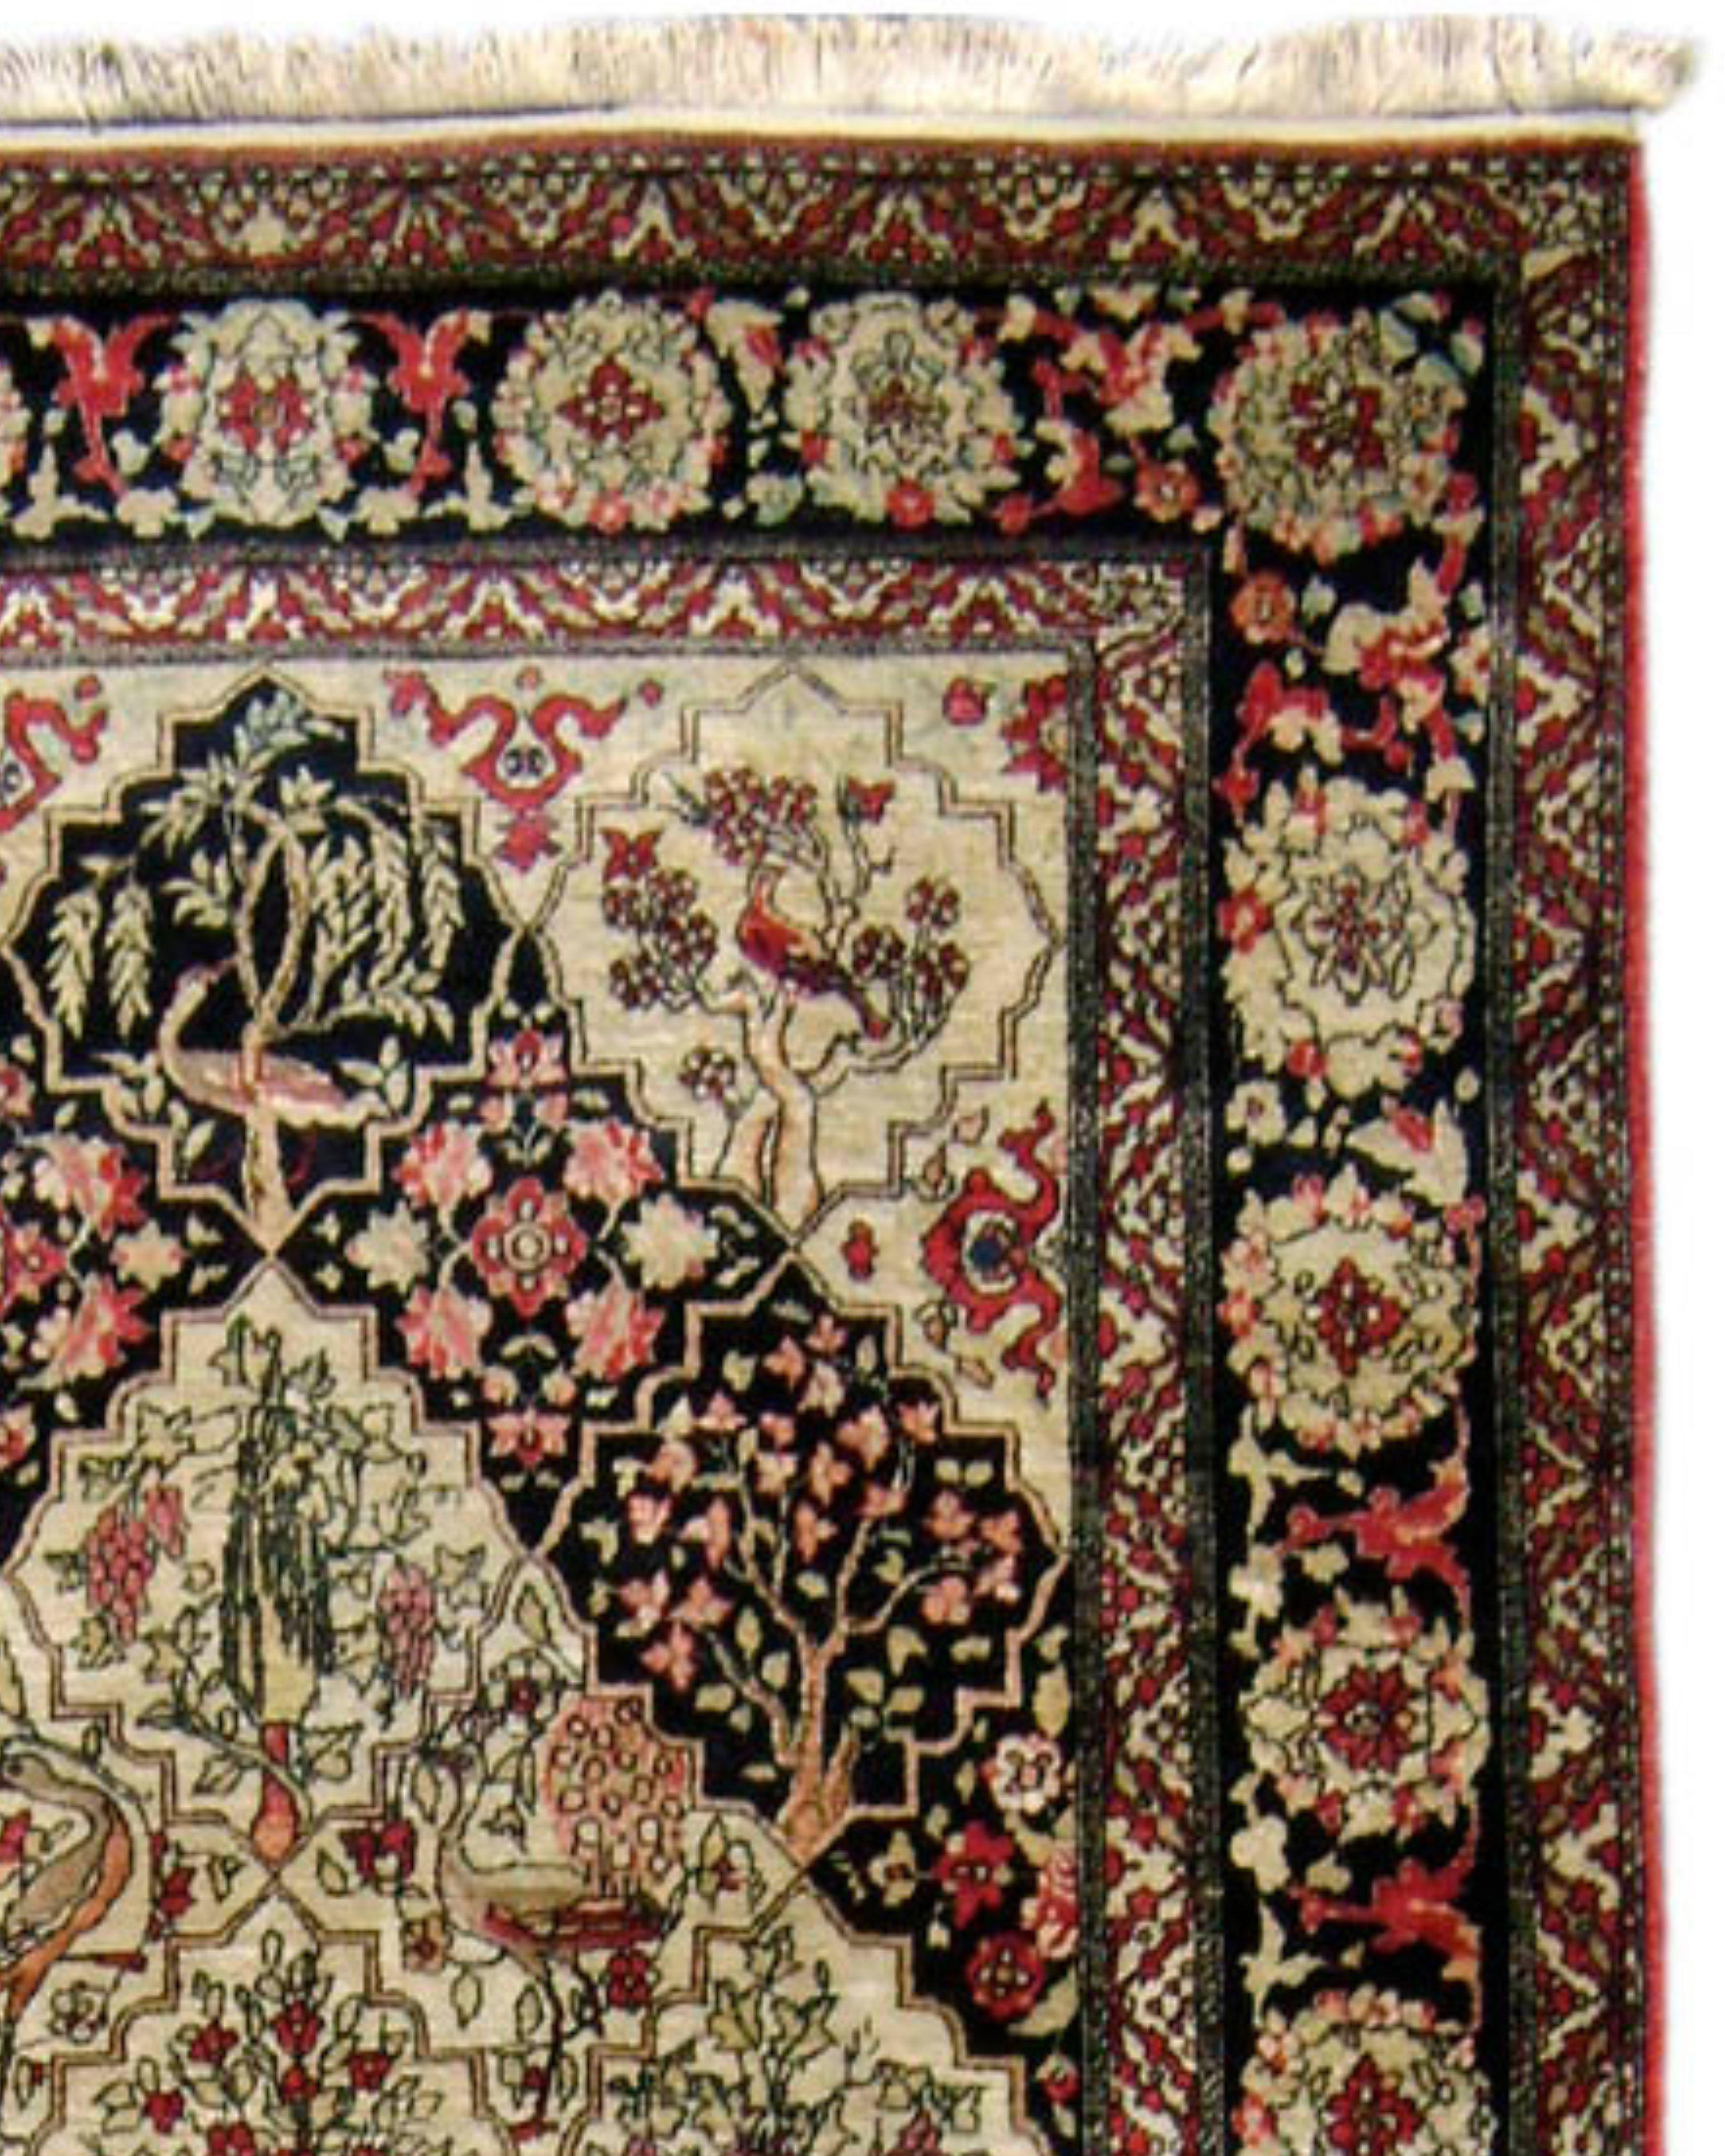 Antique Persian Isfahan Rug, Early 20th Century

This Isfahan rug features beautiful depictions of birds, flowers, and trees throughout the piece and is in excellent condition.

Additional Information:
Dimensions: 4'6